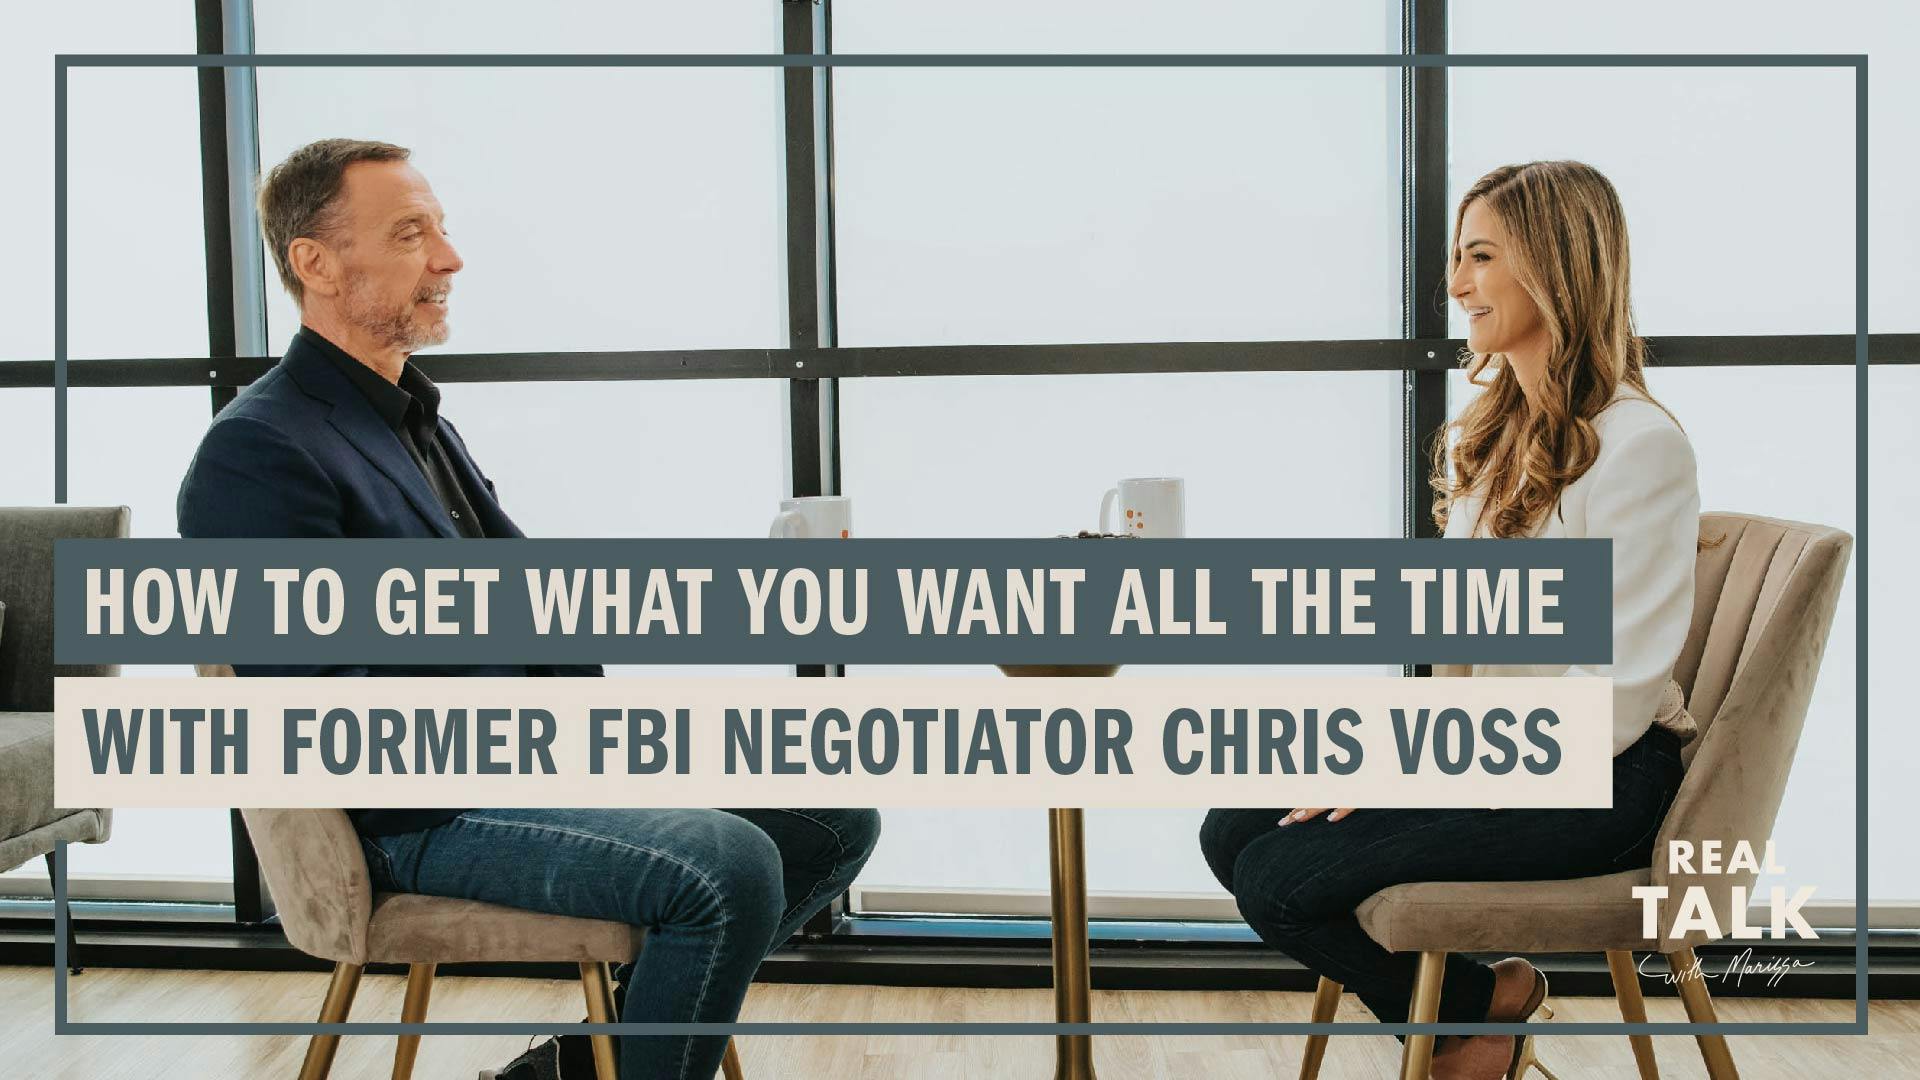 How to Get What You Want All the Time with Former FBI Negotiator Chris Voss